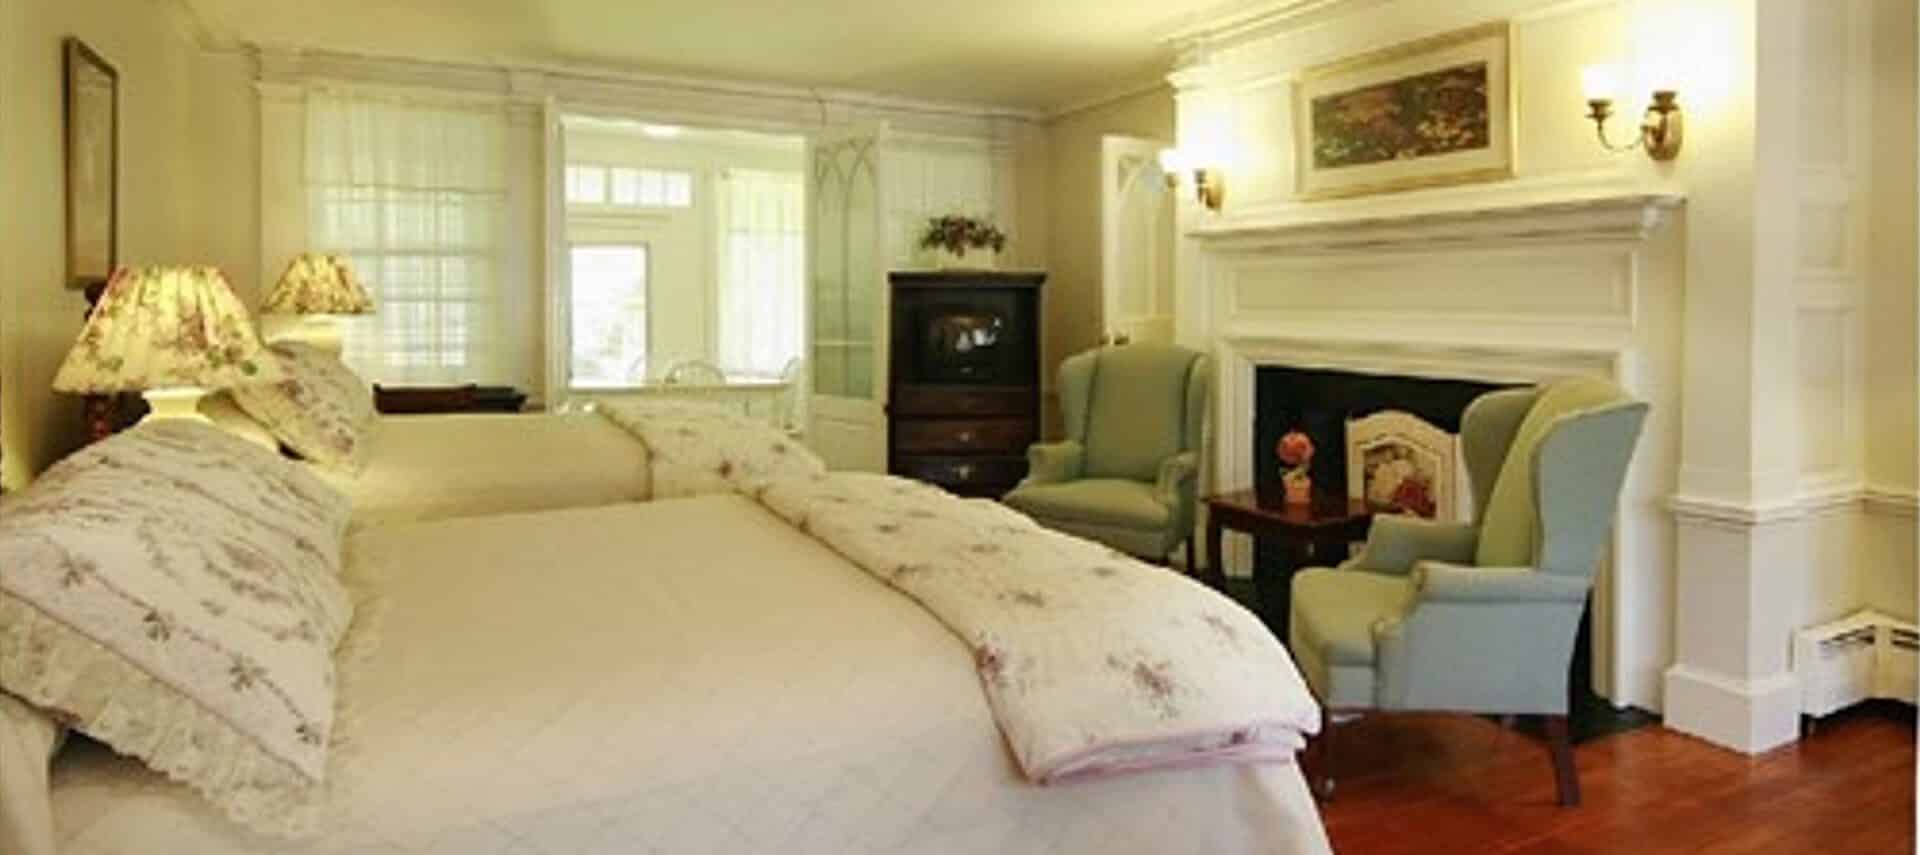 Bedroom with two queen beds, large fireplace, wingback sitting chairs and antique hutch